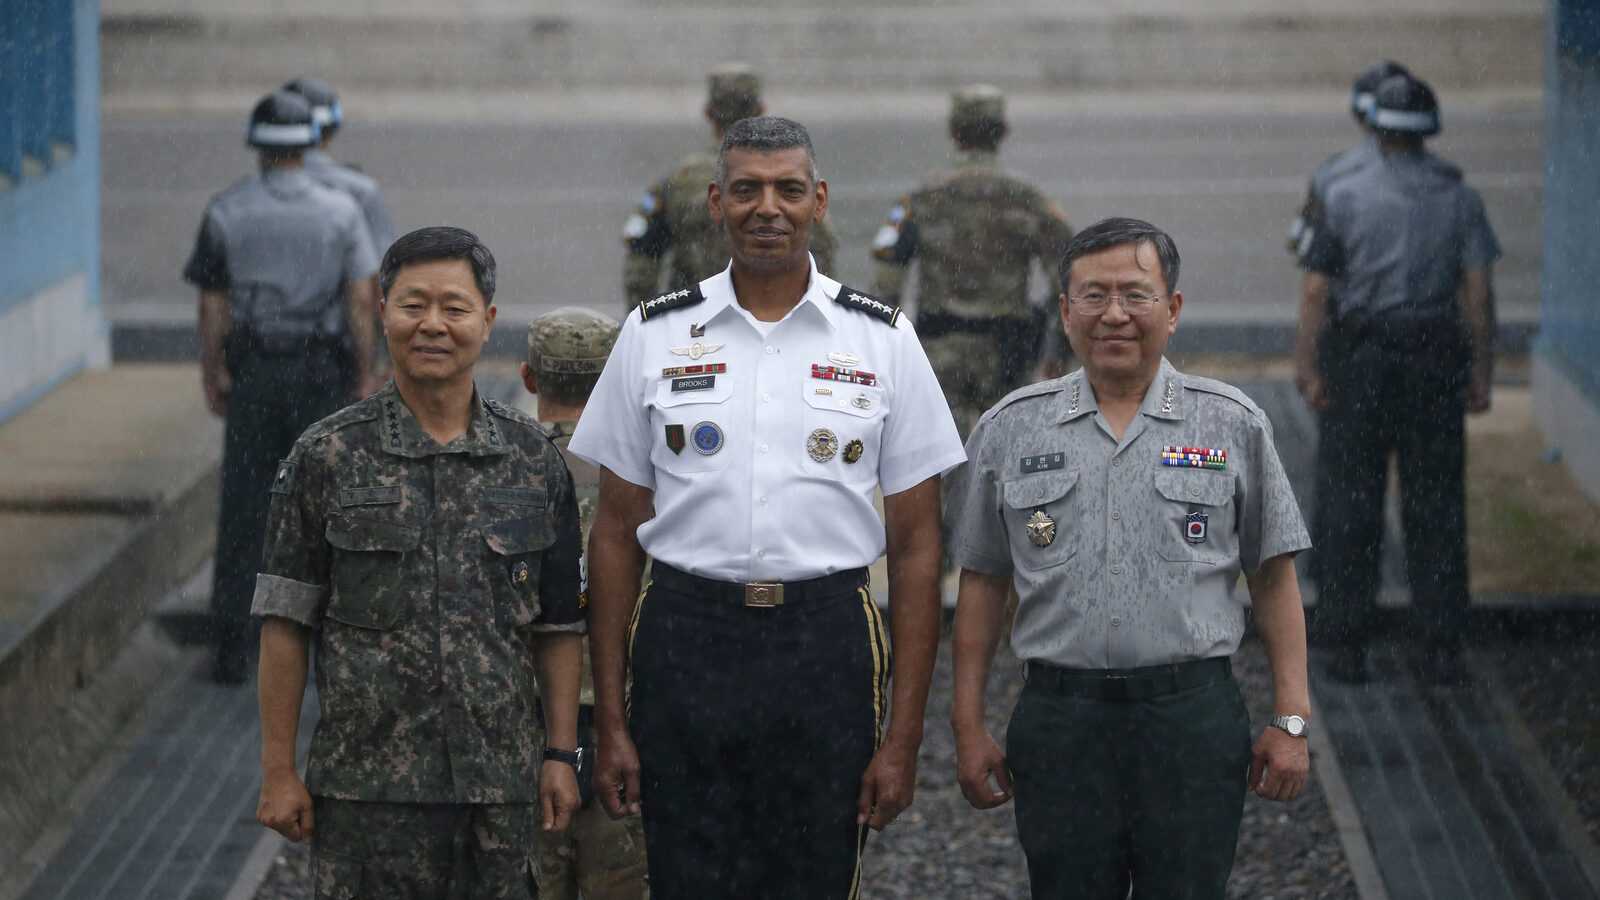 United States Forces Korea General Vincent K. Brooks , center, poses for photographs with South Korean military officials during a ceremony marking the anniversary of the signing of the Korean War ceasefire armistice agreement, South Korea., July 27, 2016. (Kim Hong-Ji/AP)